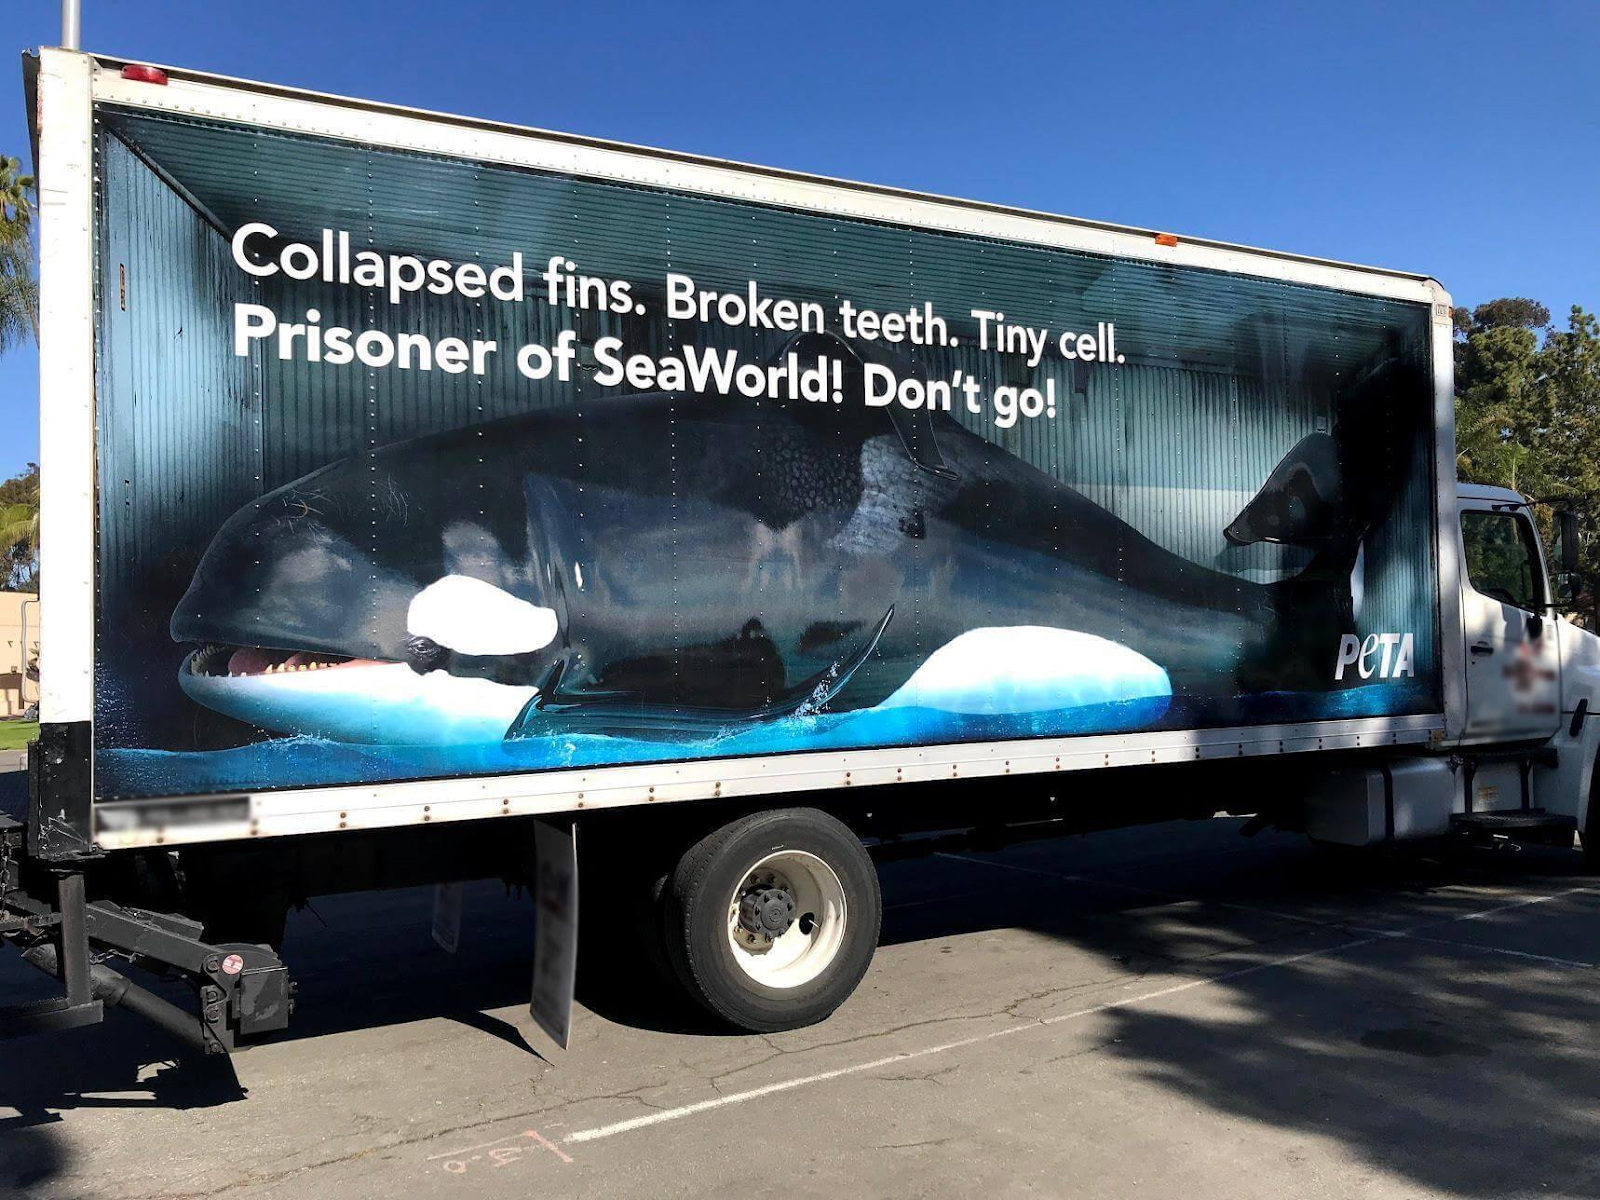 An image of a truck ad with a whale on it from the organisation PETA